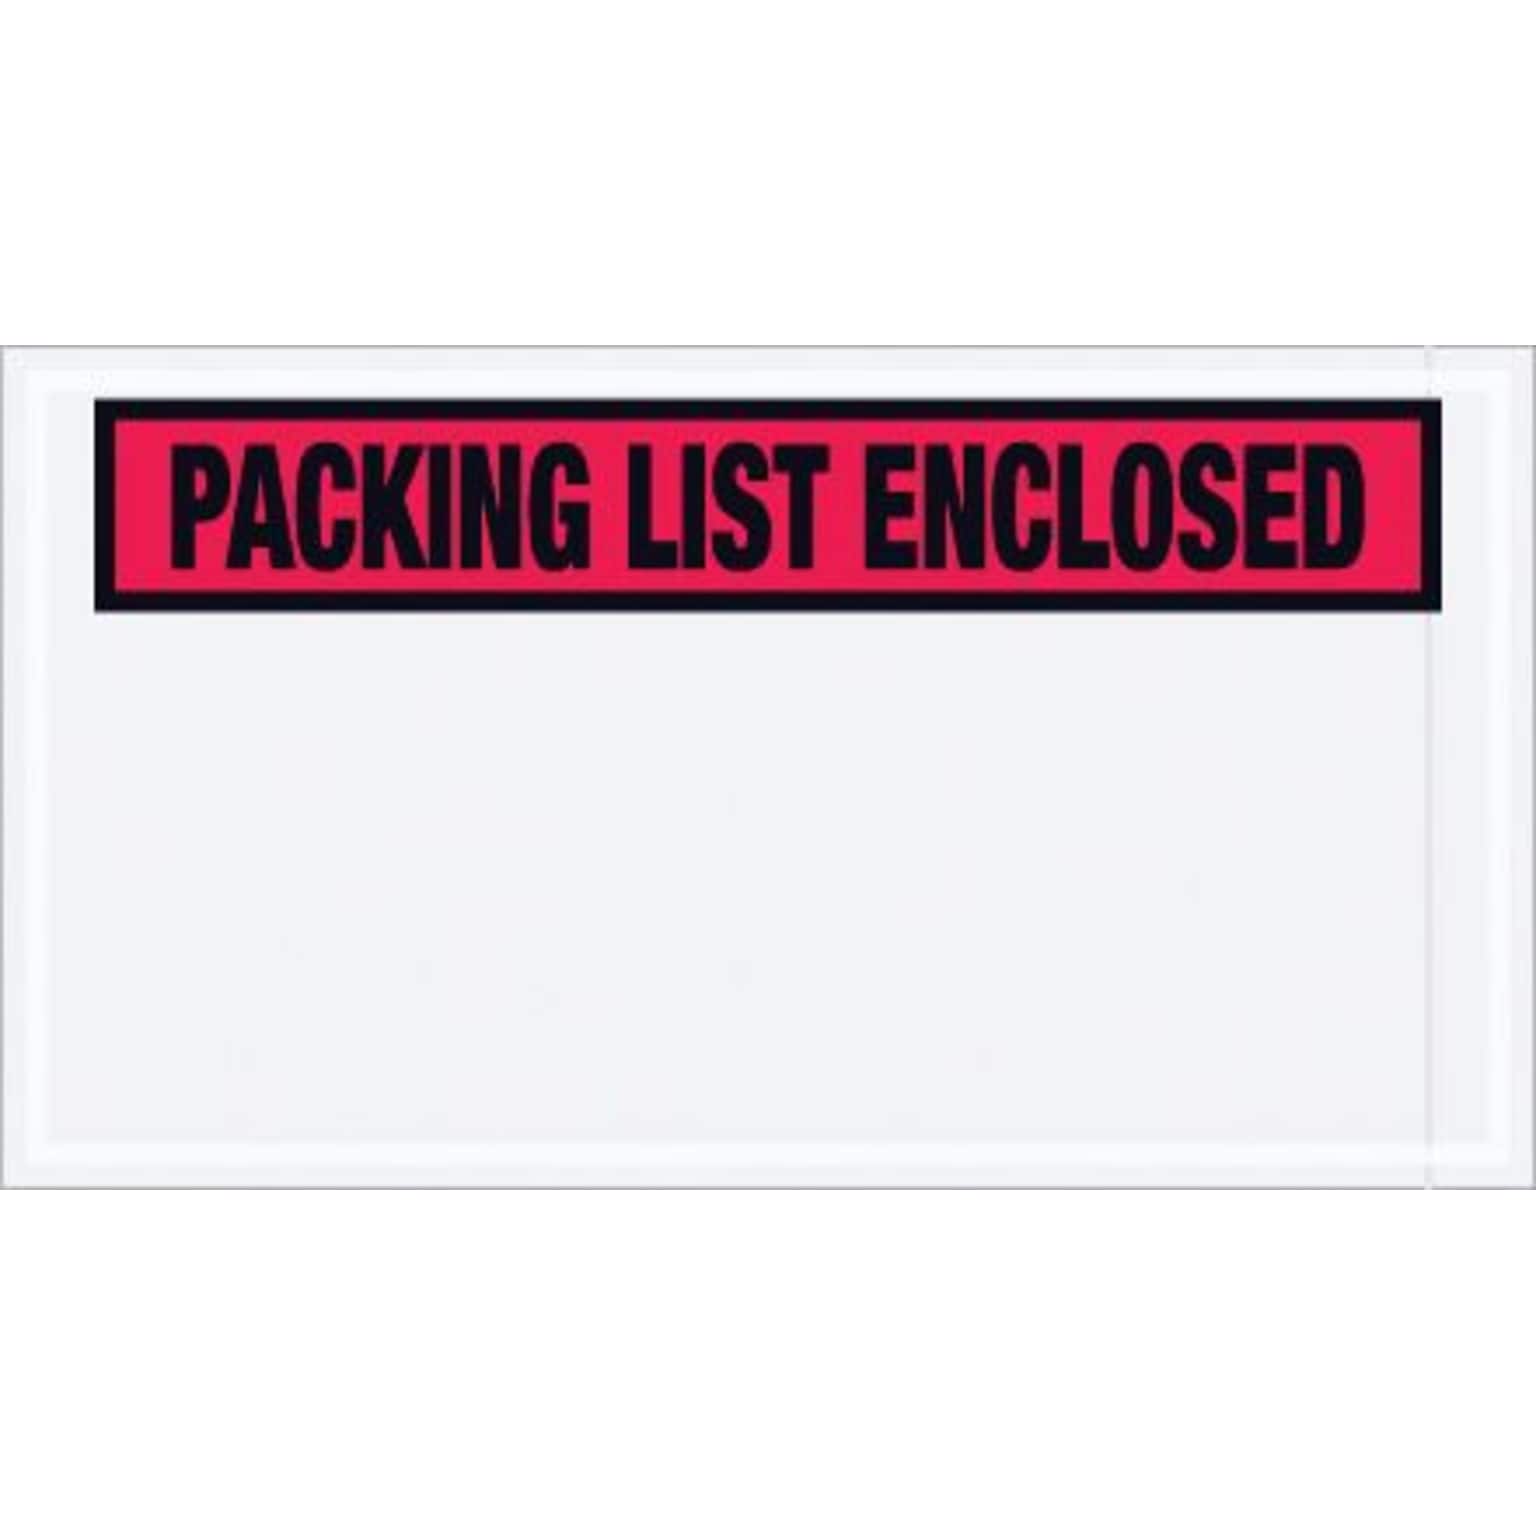 Quill Brand® Packing List Envelope, 5 1/2 x 10 - Red Panel Face, Packing List Enclosed, 1000/Case